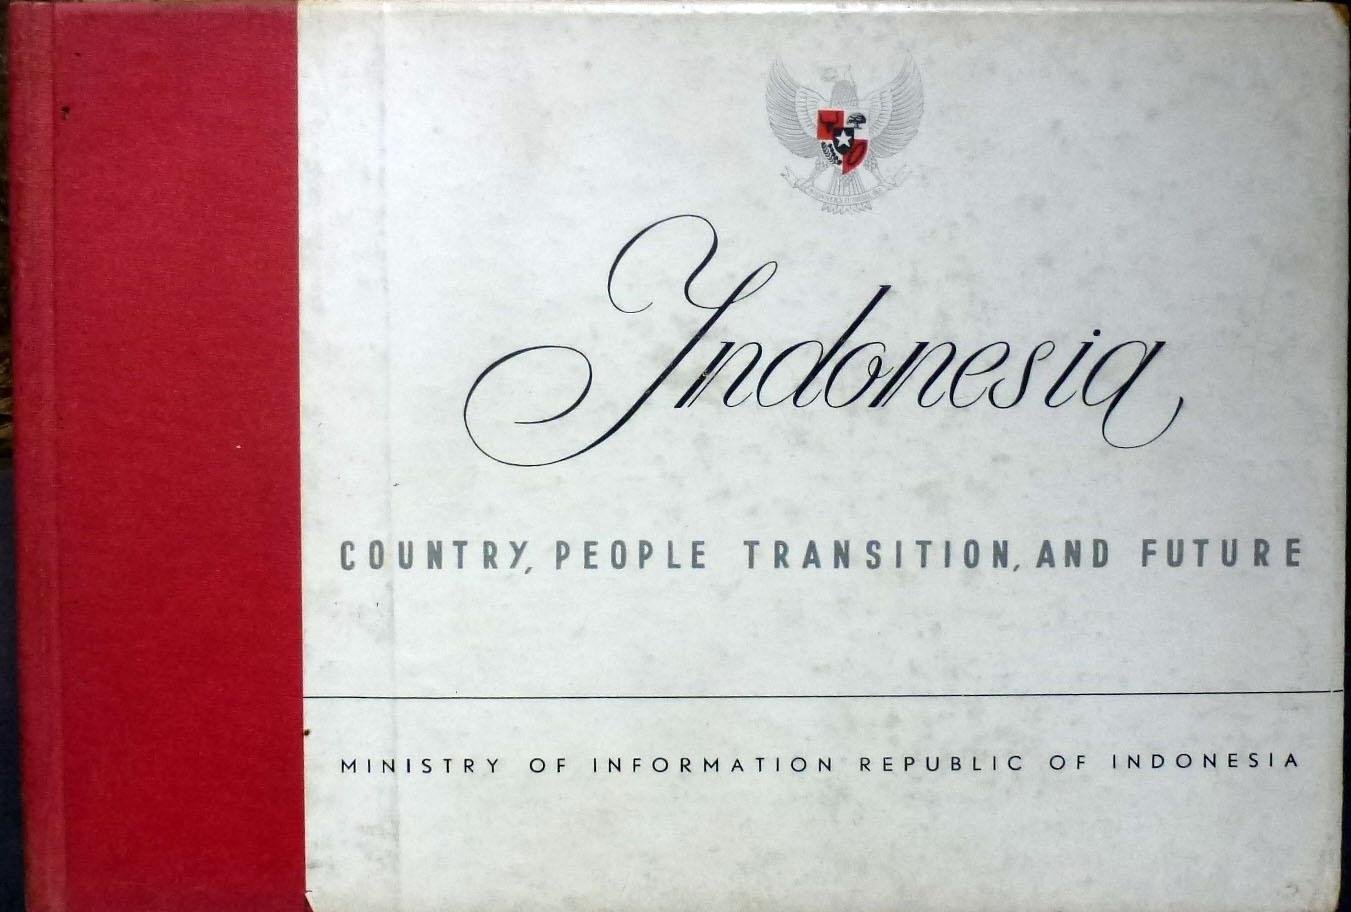 Abdulgani,Roeslan [The Ministry of information] - Indonesia. Country, People Transition, and Future